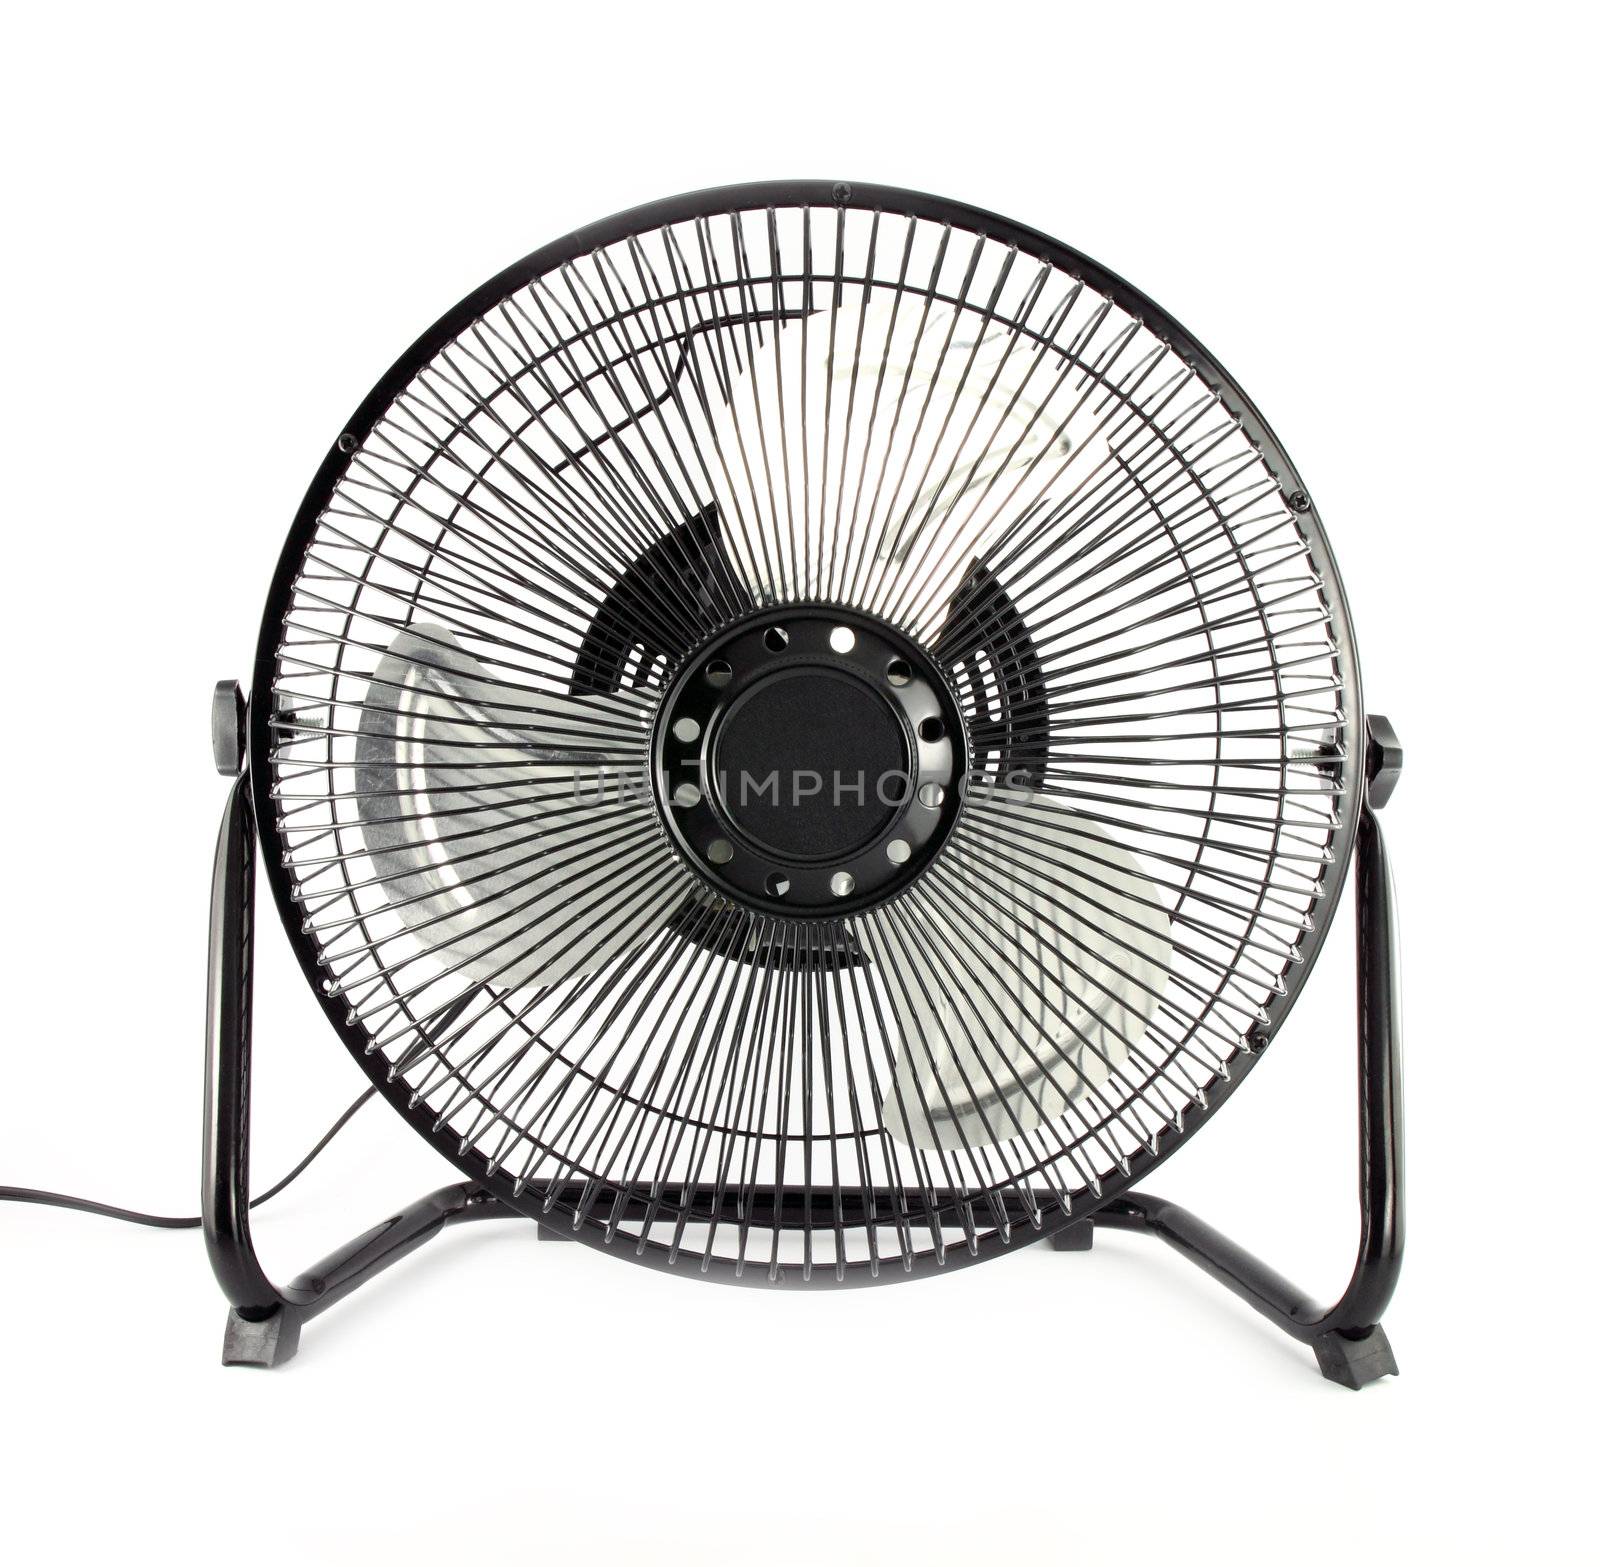 The black mini fan to reduce some hot weather